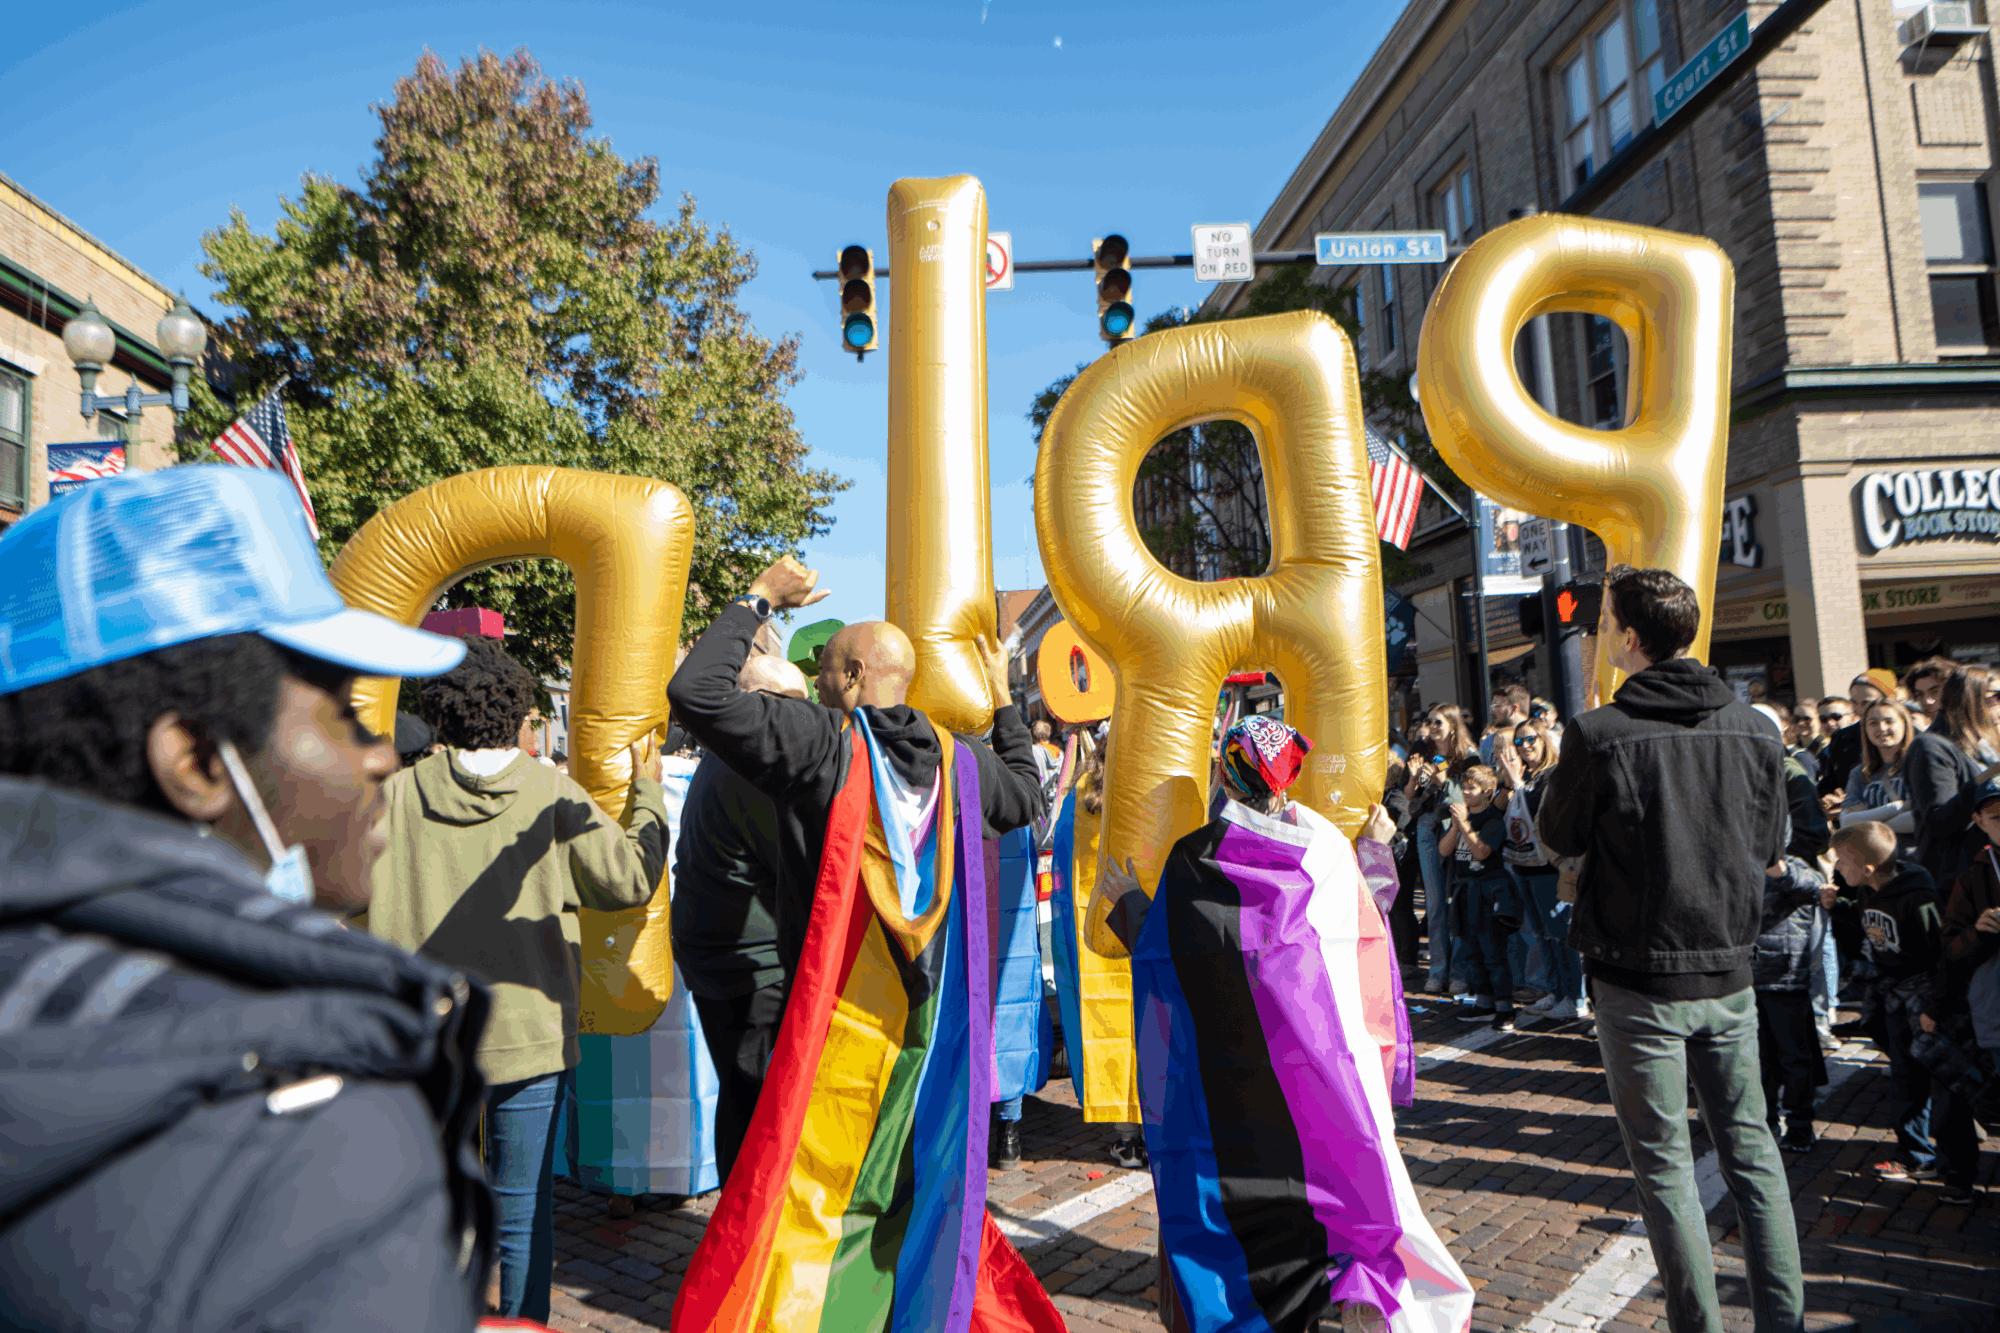 Staff and supporters of Ohio University’s LGBT Center show off their pride during the Homecoming Parade.